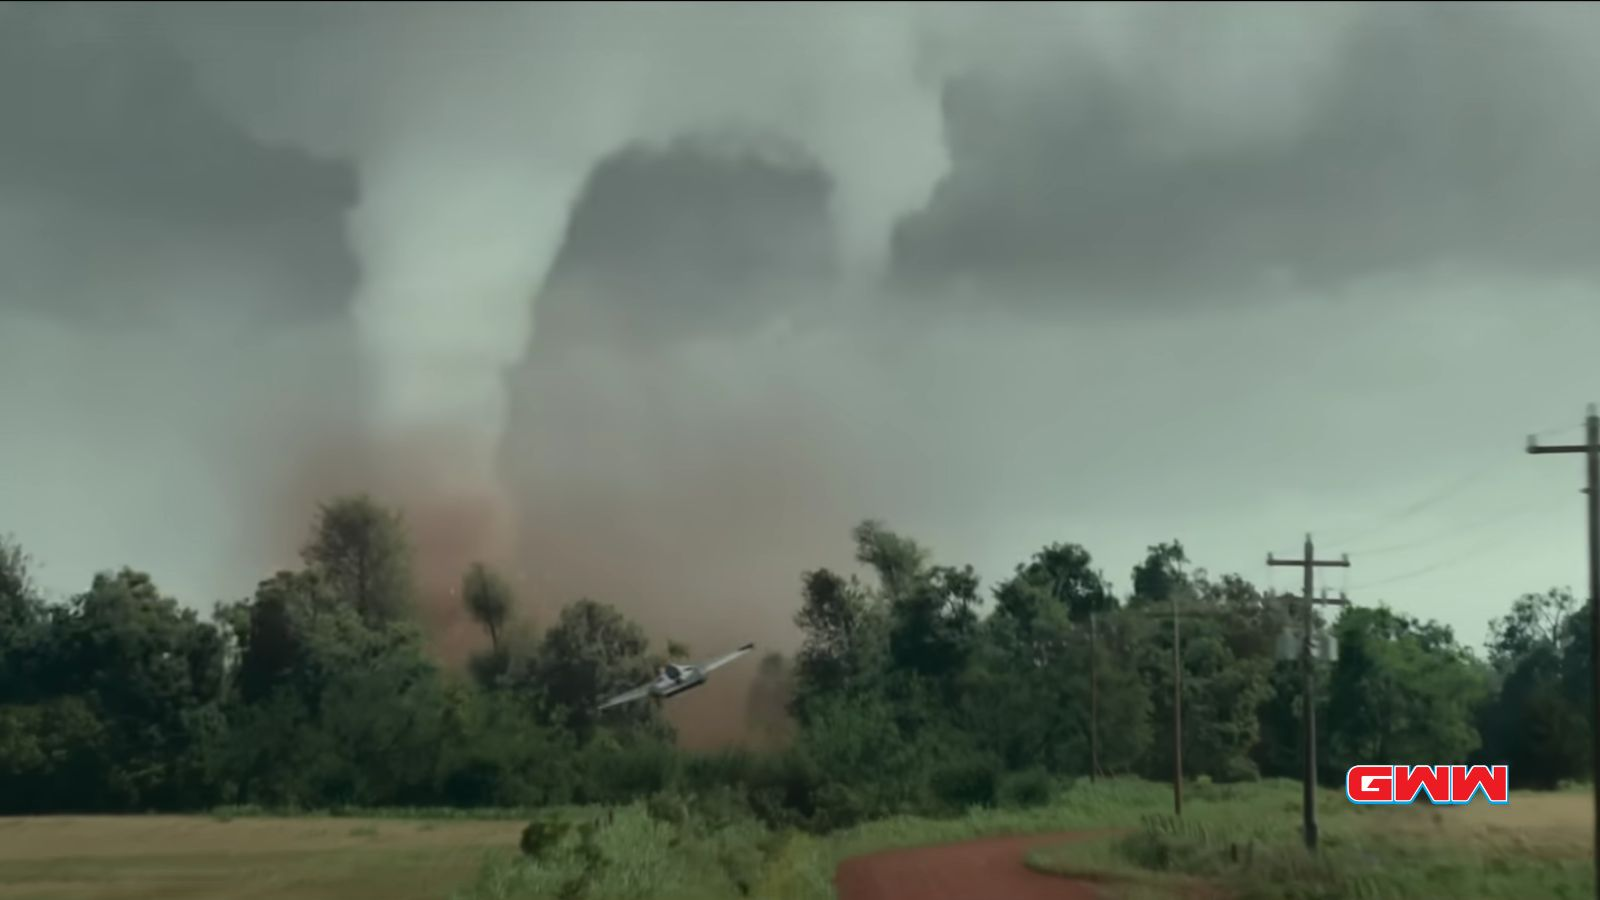 A drone flies off going to the twister, Twisters movie